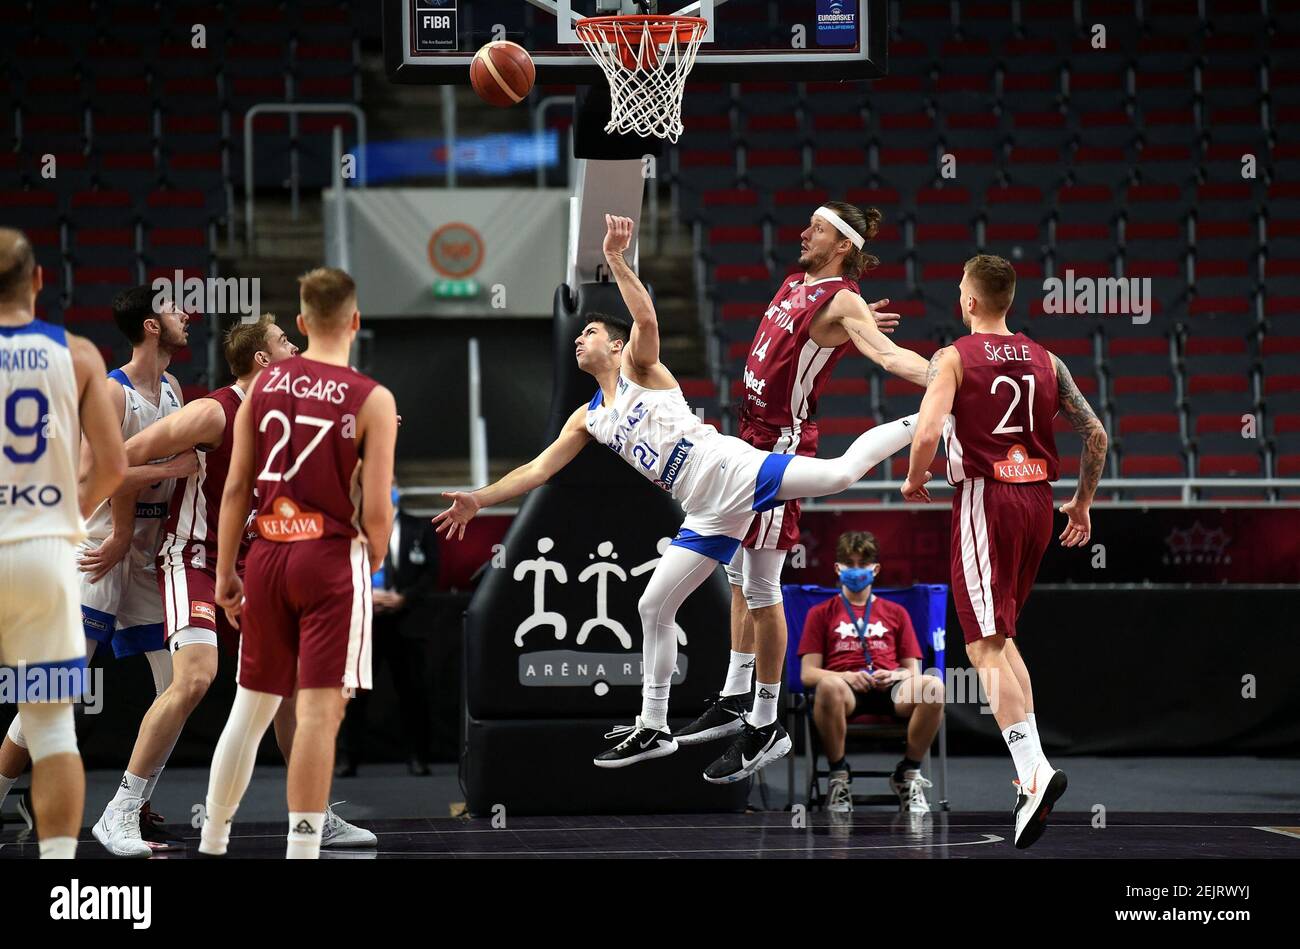 Riga, Latvia. 22nd Feb, 2021. Players compete during the FIBA EuroBasket 2022 qualifying basketball match between Latvia and Greece in Riga, Latvia, Feb